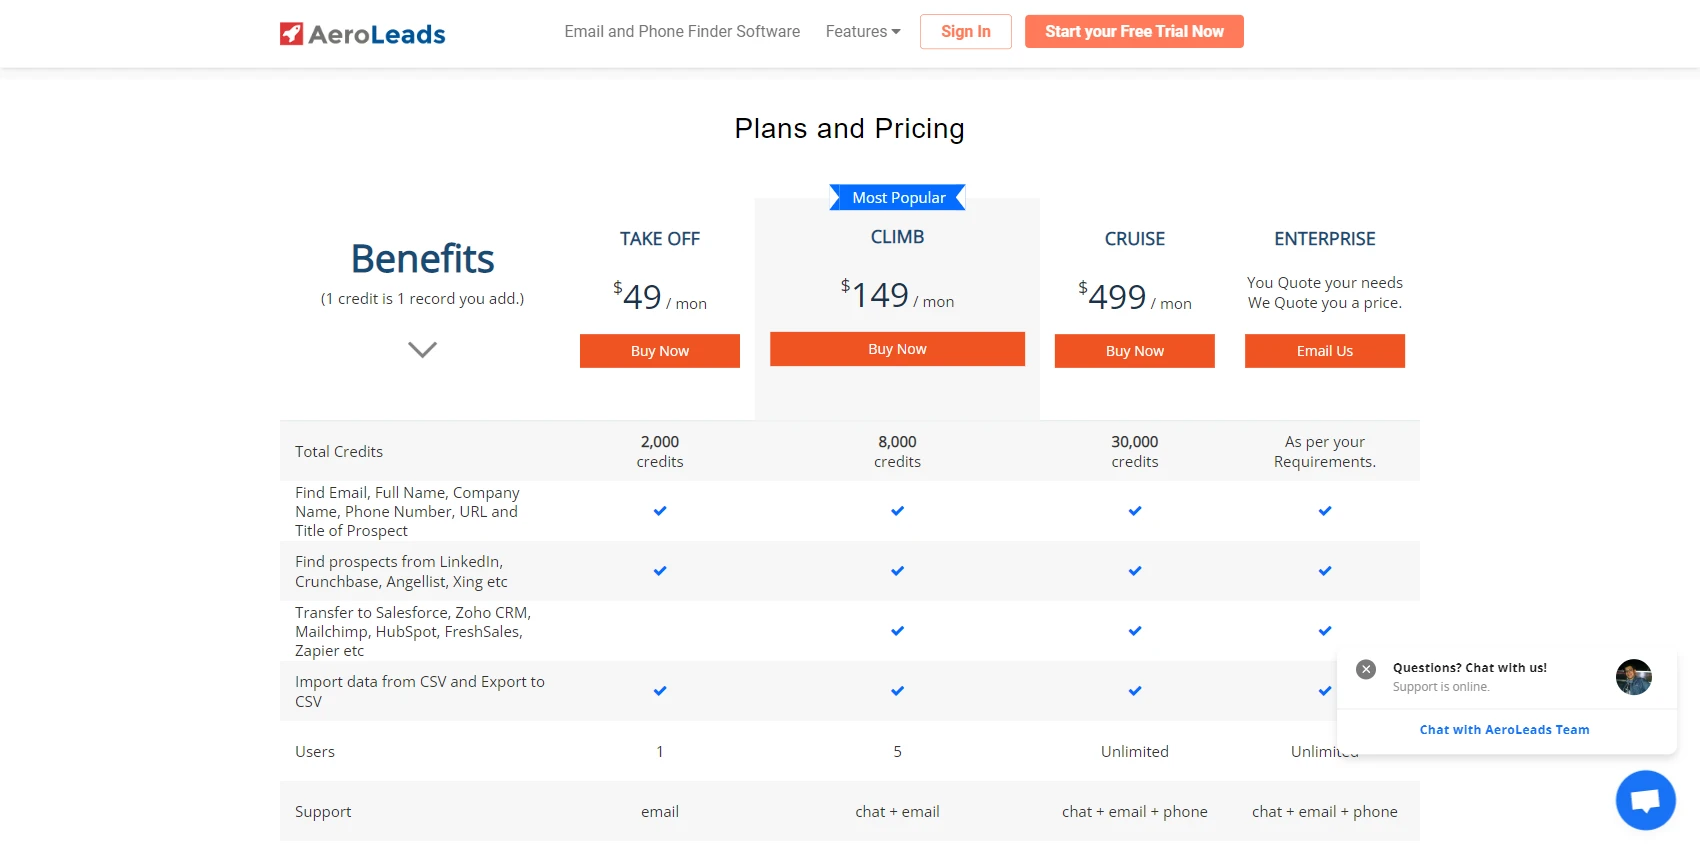 AeroLeads Pricing